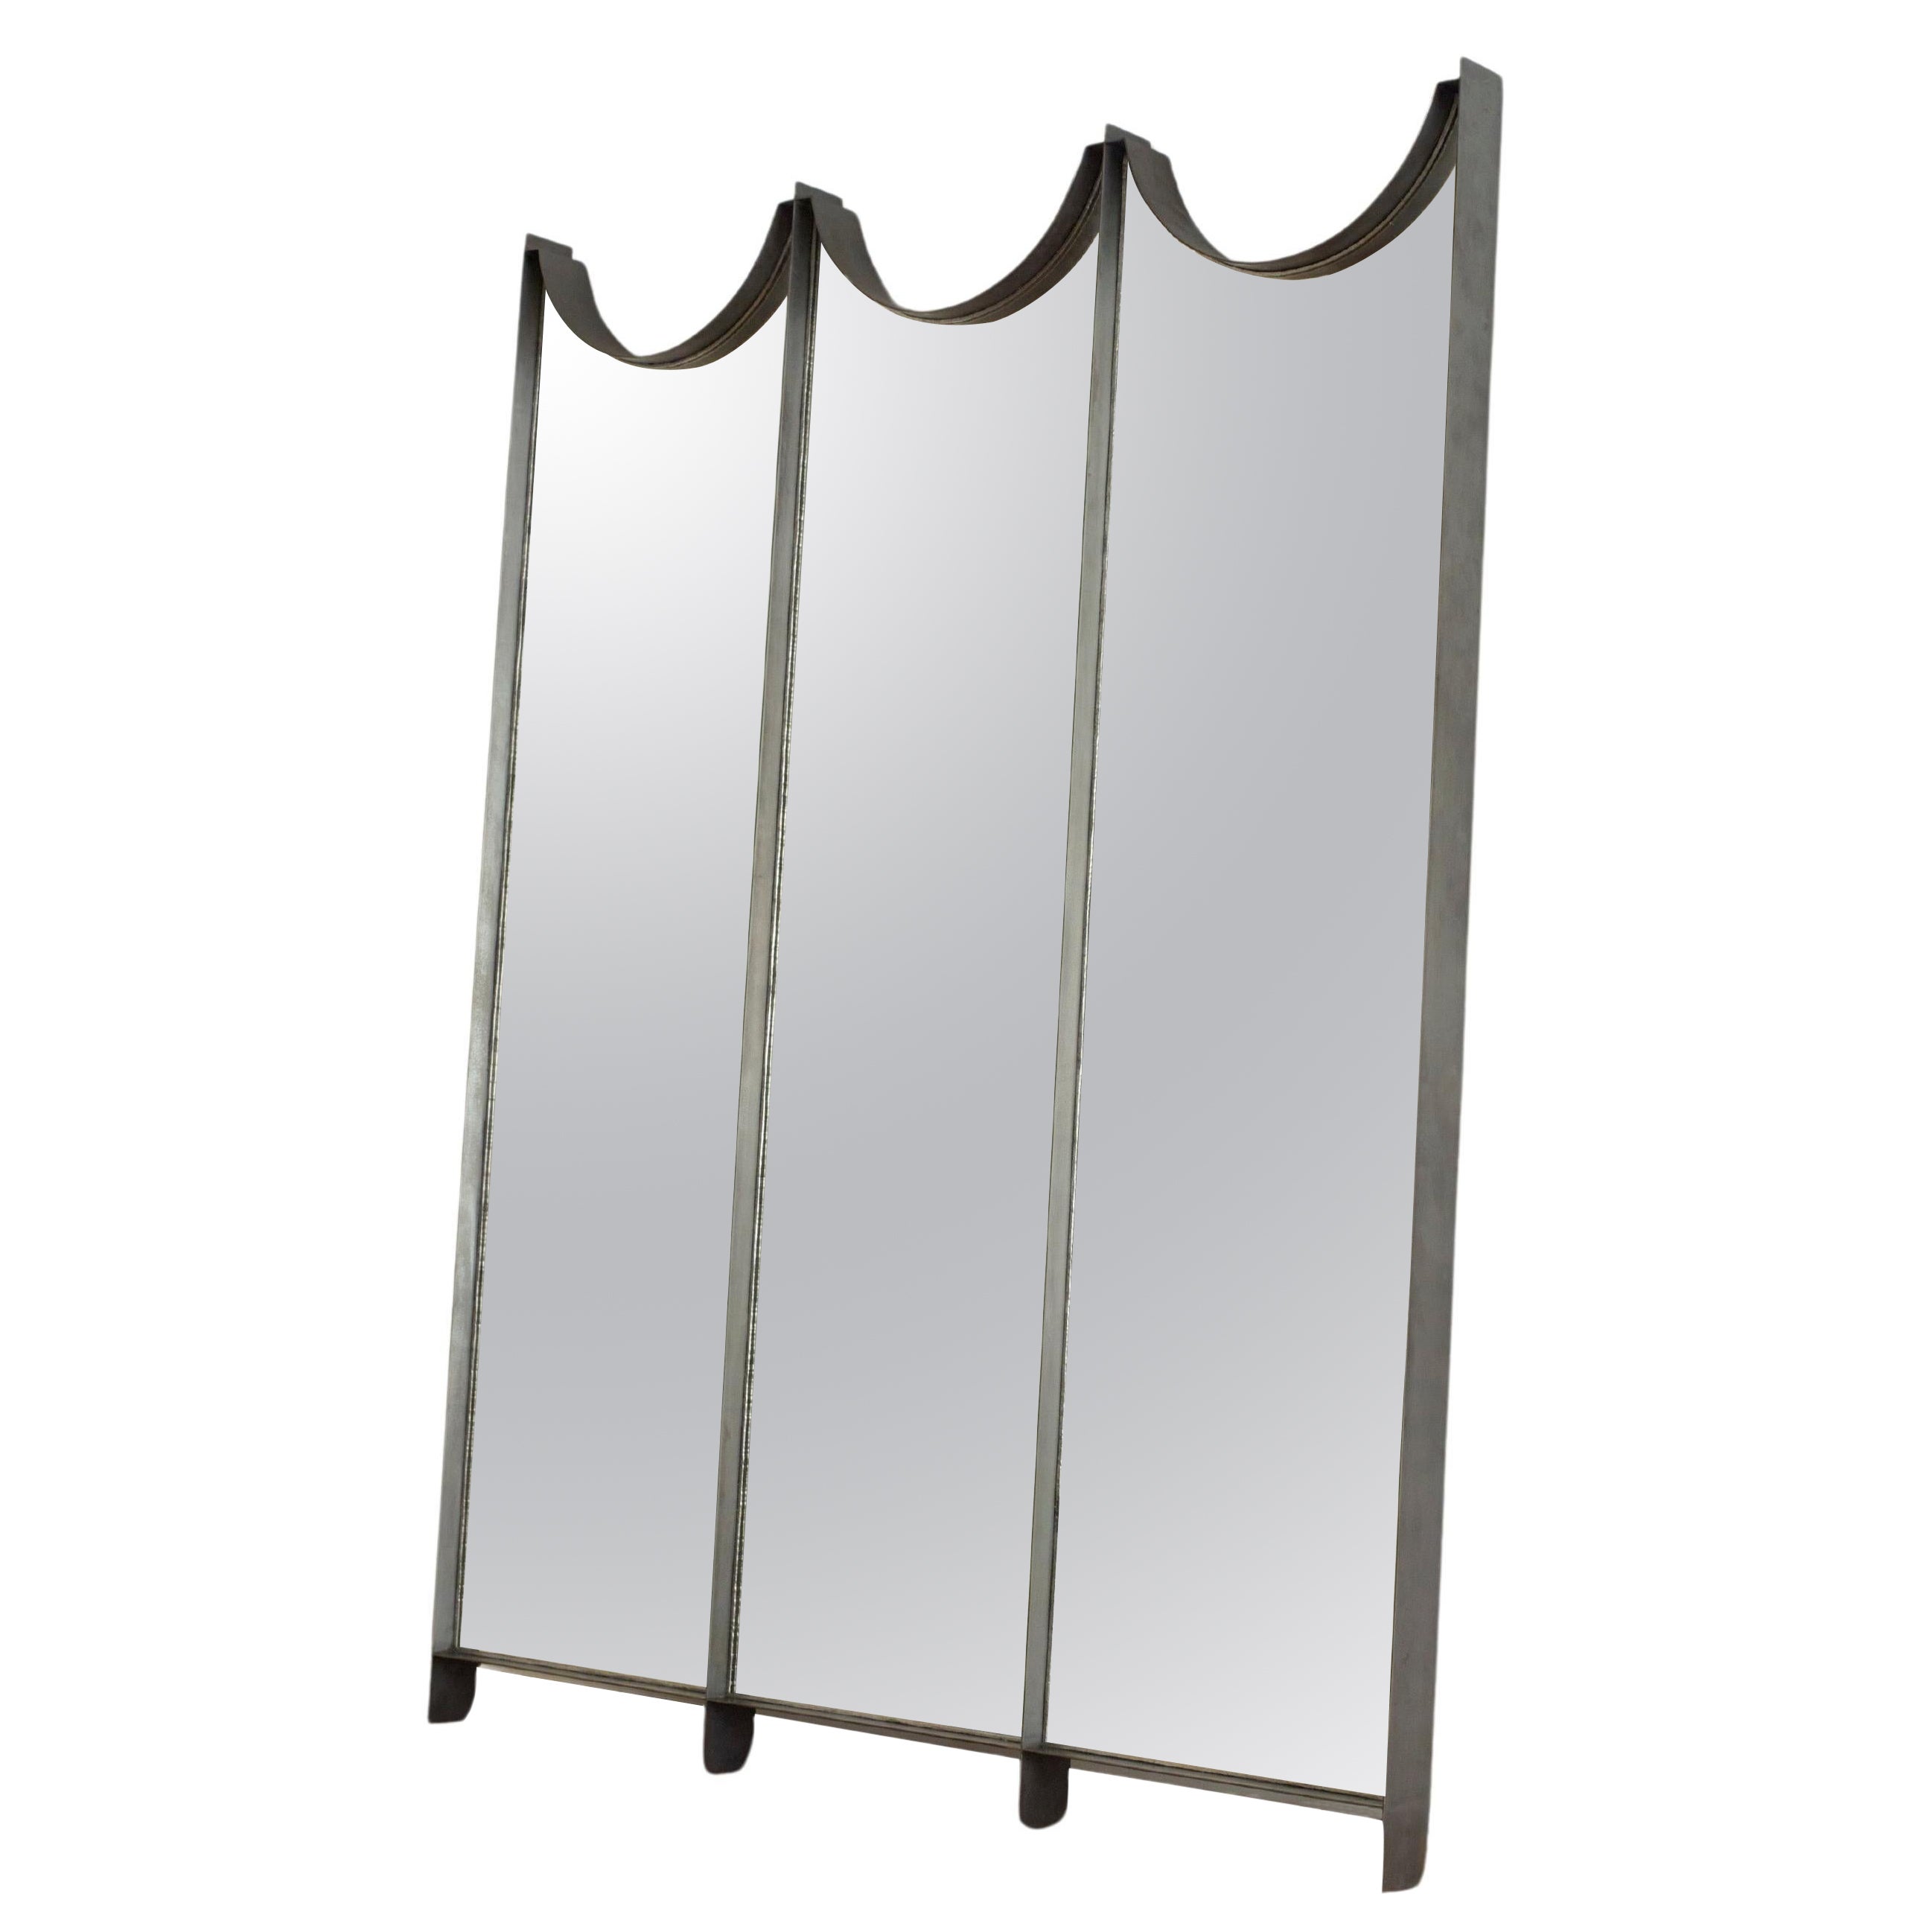 Large, Floor Standing or Wall Leaning 3-Panel Full-Length Mirror in Iron Frame For Sale